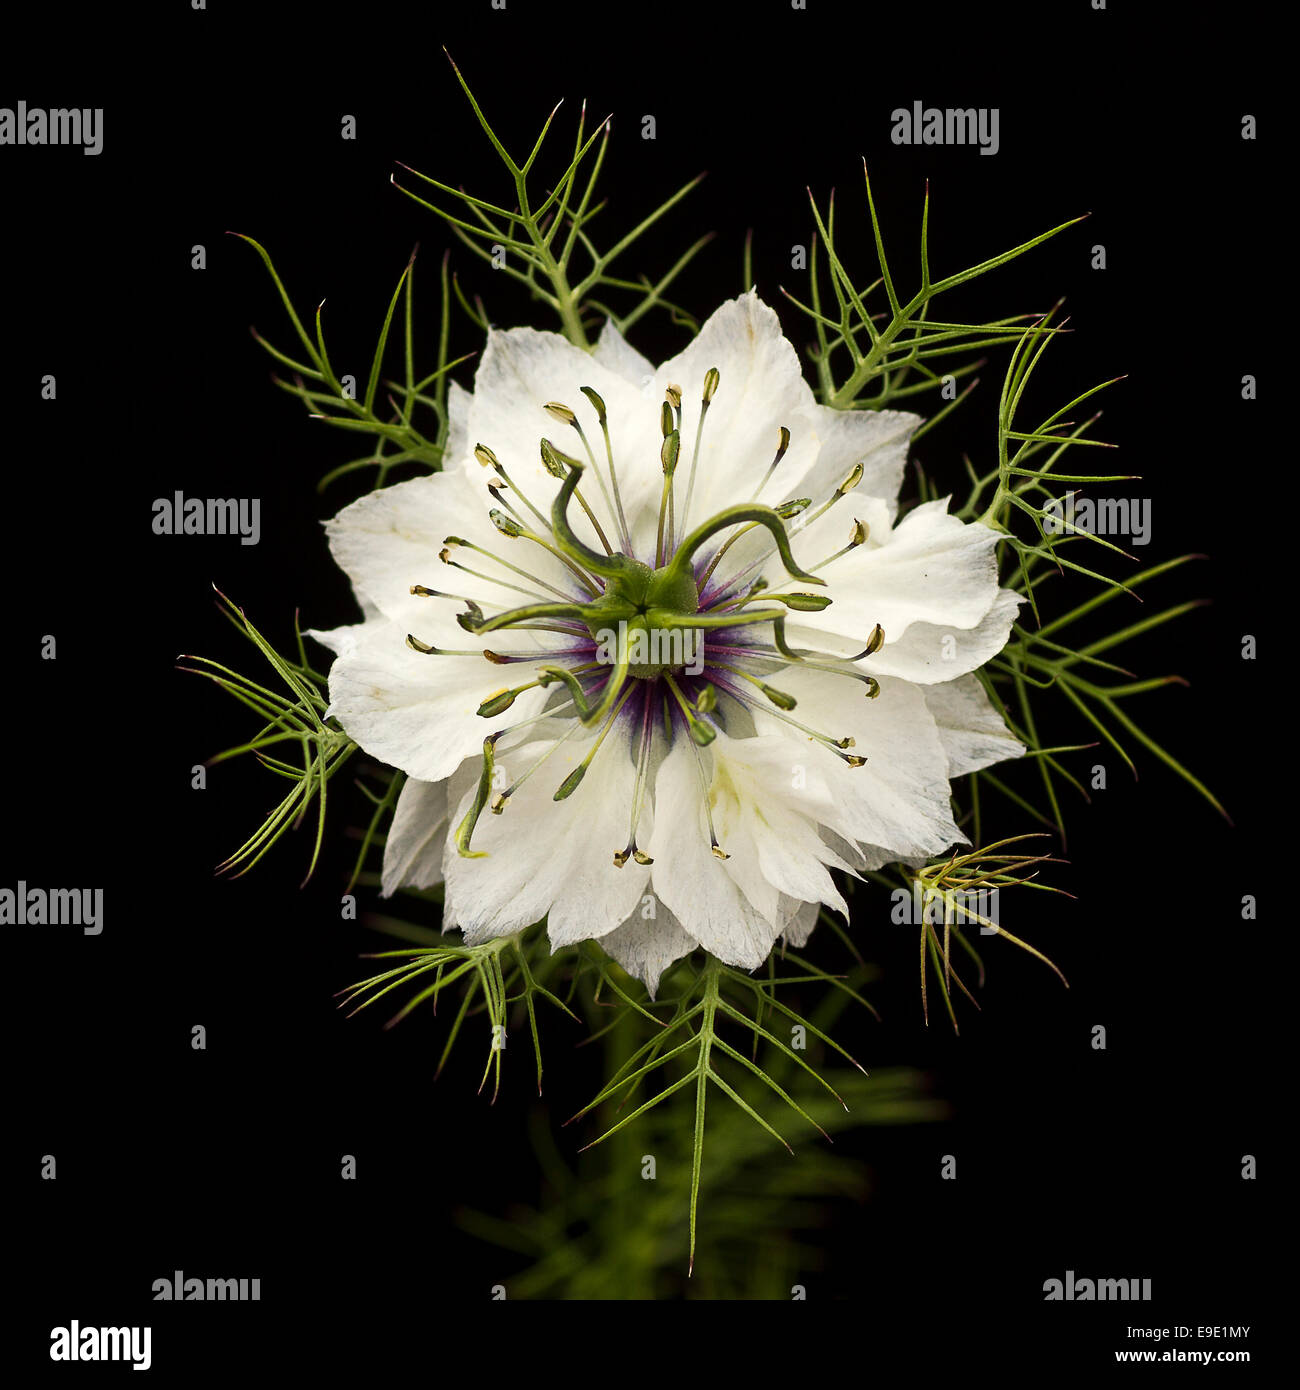 A single flower of Nigella damascena - known by gardeners as 'love-in-a-mist' - in close-up and set against a black background. Stock Photo